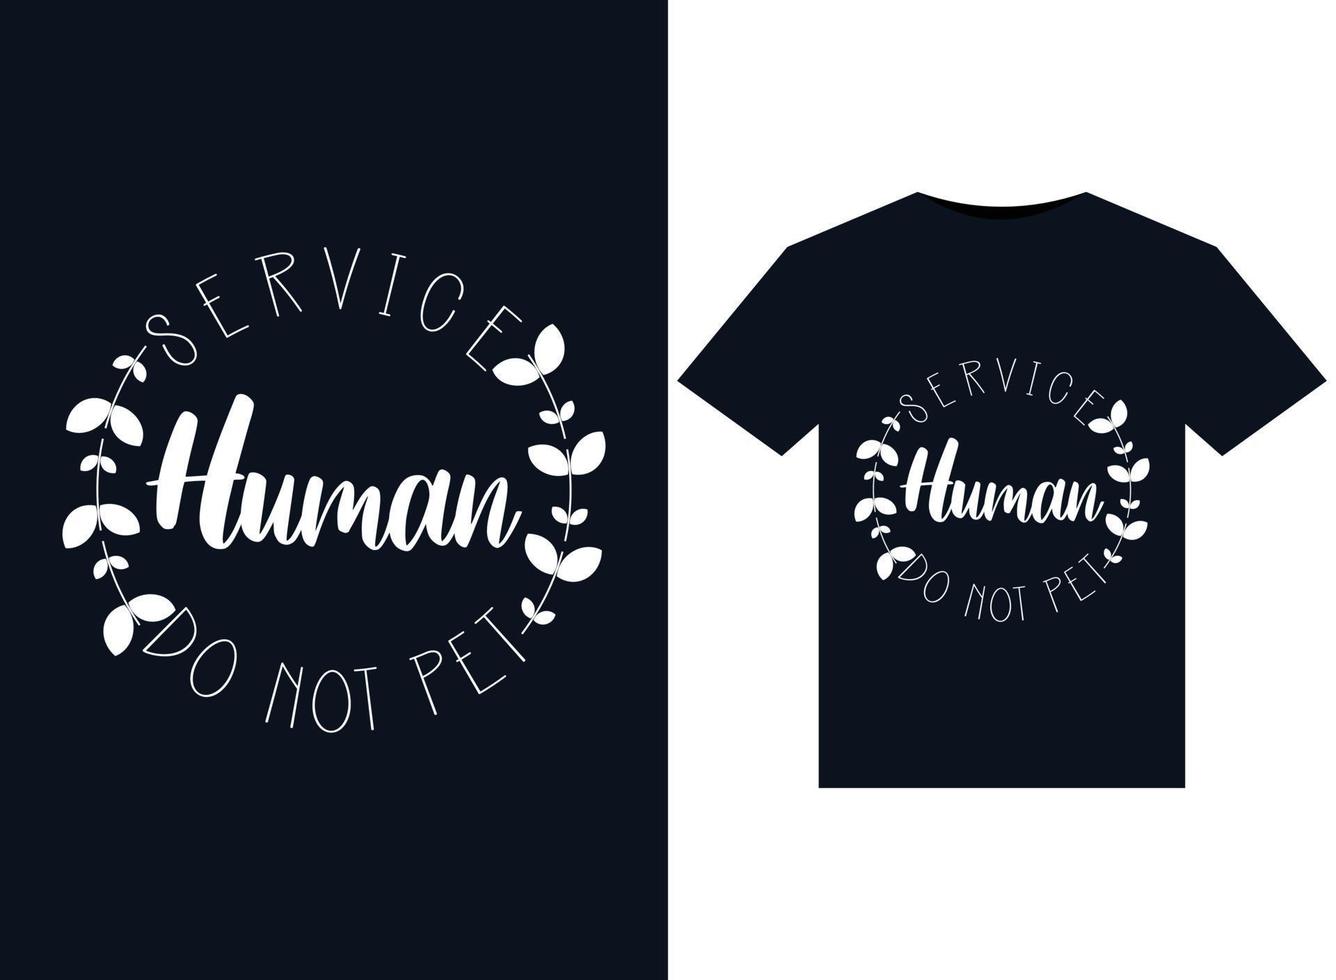 Service human do not pet illustrations for print-ready T-Shirts design vector